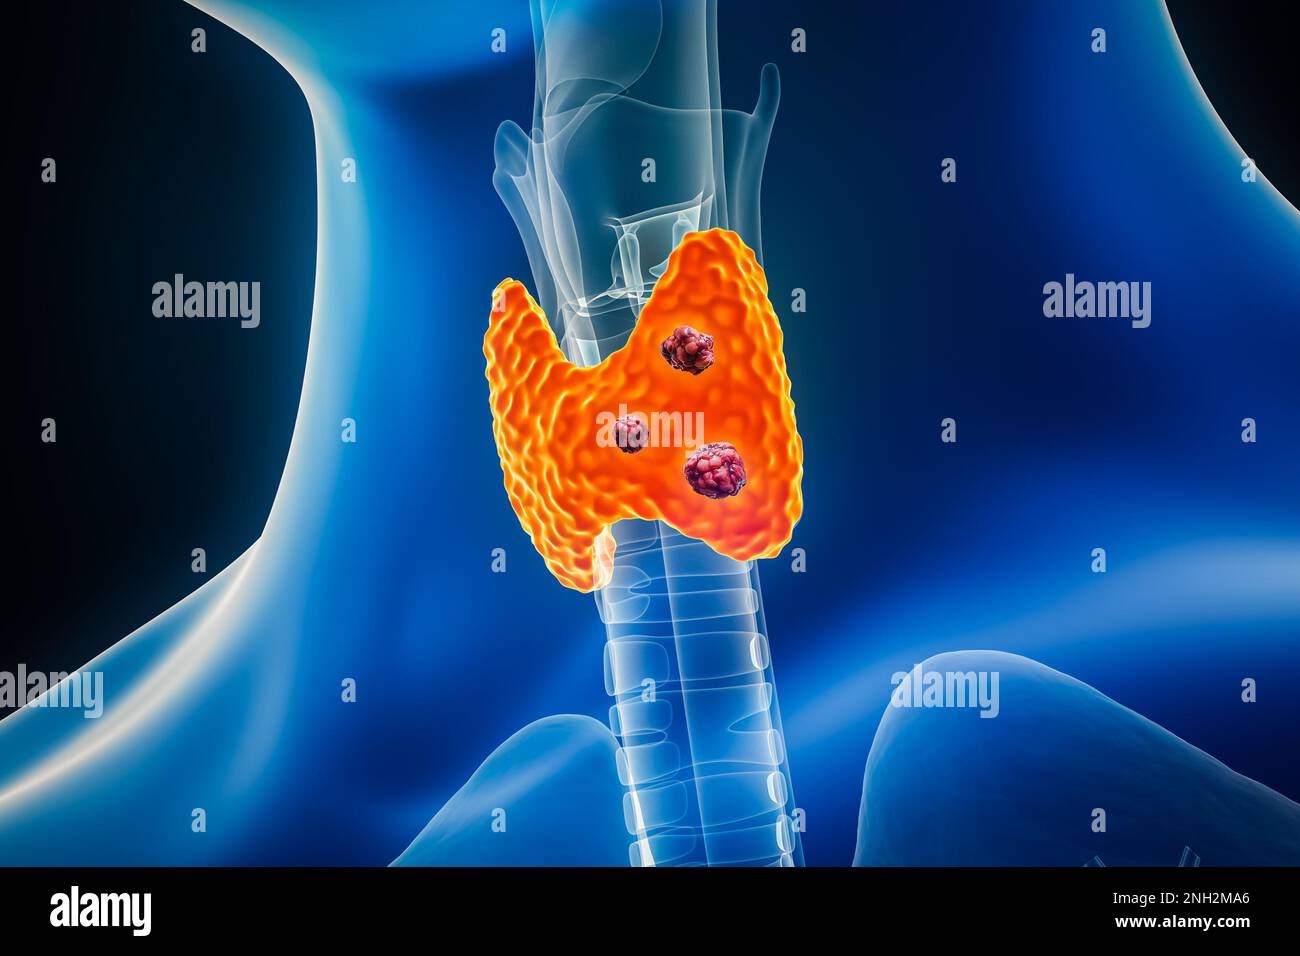 Thyroid cancer with organs and tumors or cancerous cells 3D rendering illustration with male body contours. Anatomy, oncology, biomedical, medical, bi Stock Photo